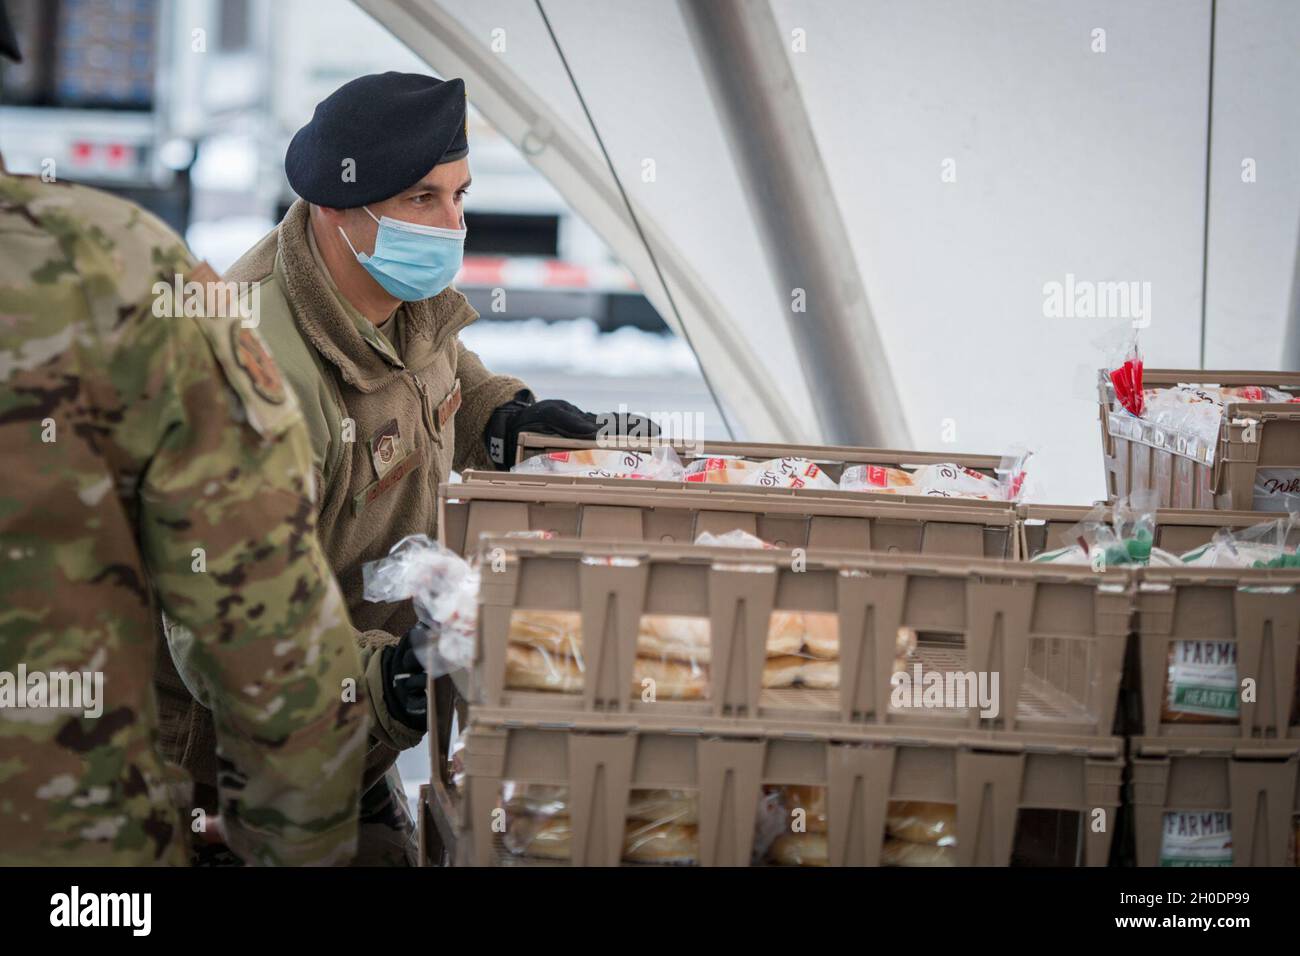 U.S. Air Force Master Sgt. Ian McMahon, 103rd Security Forces Squadron, organizes bread trays for distribution at Rentschler Field in East Hartford, Connecticut, Feb. 4, 2021. Airmen from the Connecticut National Guard’s 103rd Airlift Wing are supporting logistics operations at Foodshare’s drive-thru emergency distribution site here, which has distributed over 8,000,000 pounds of food to 233,000 cars since April 20, 2020. Stock Photo